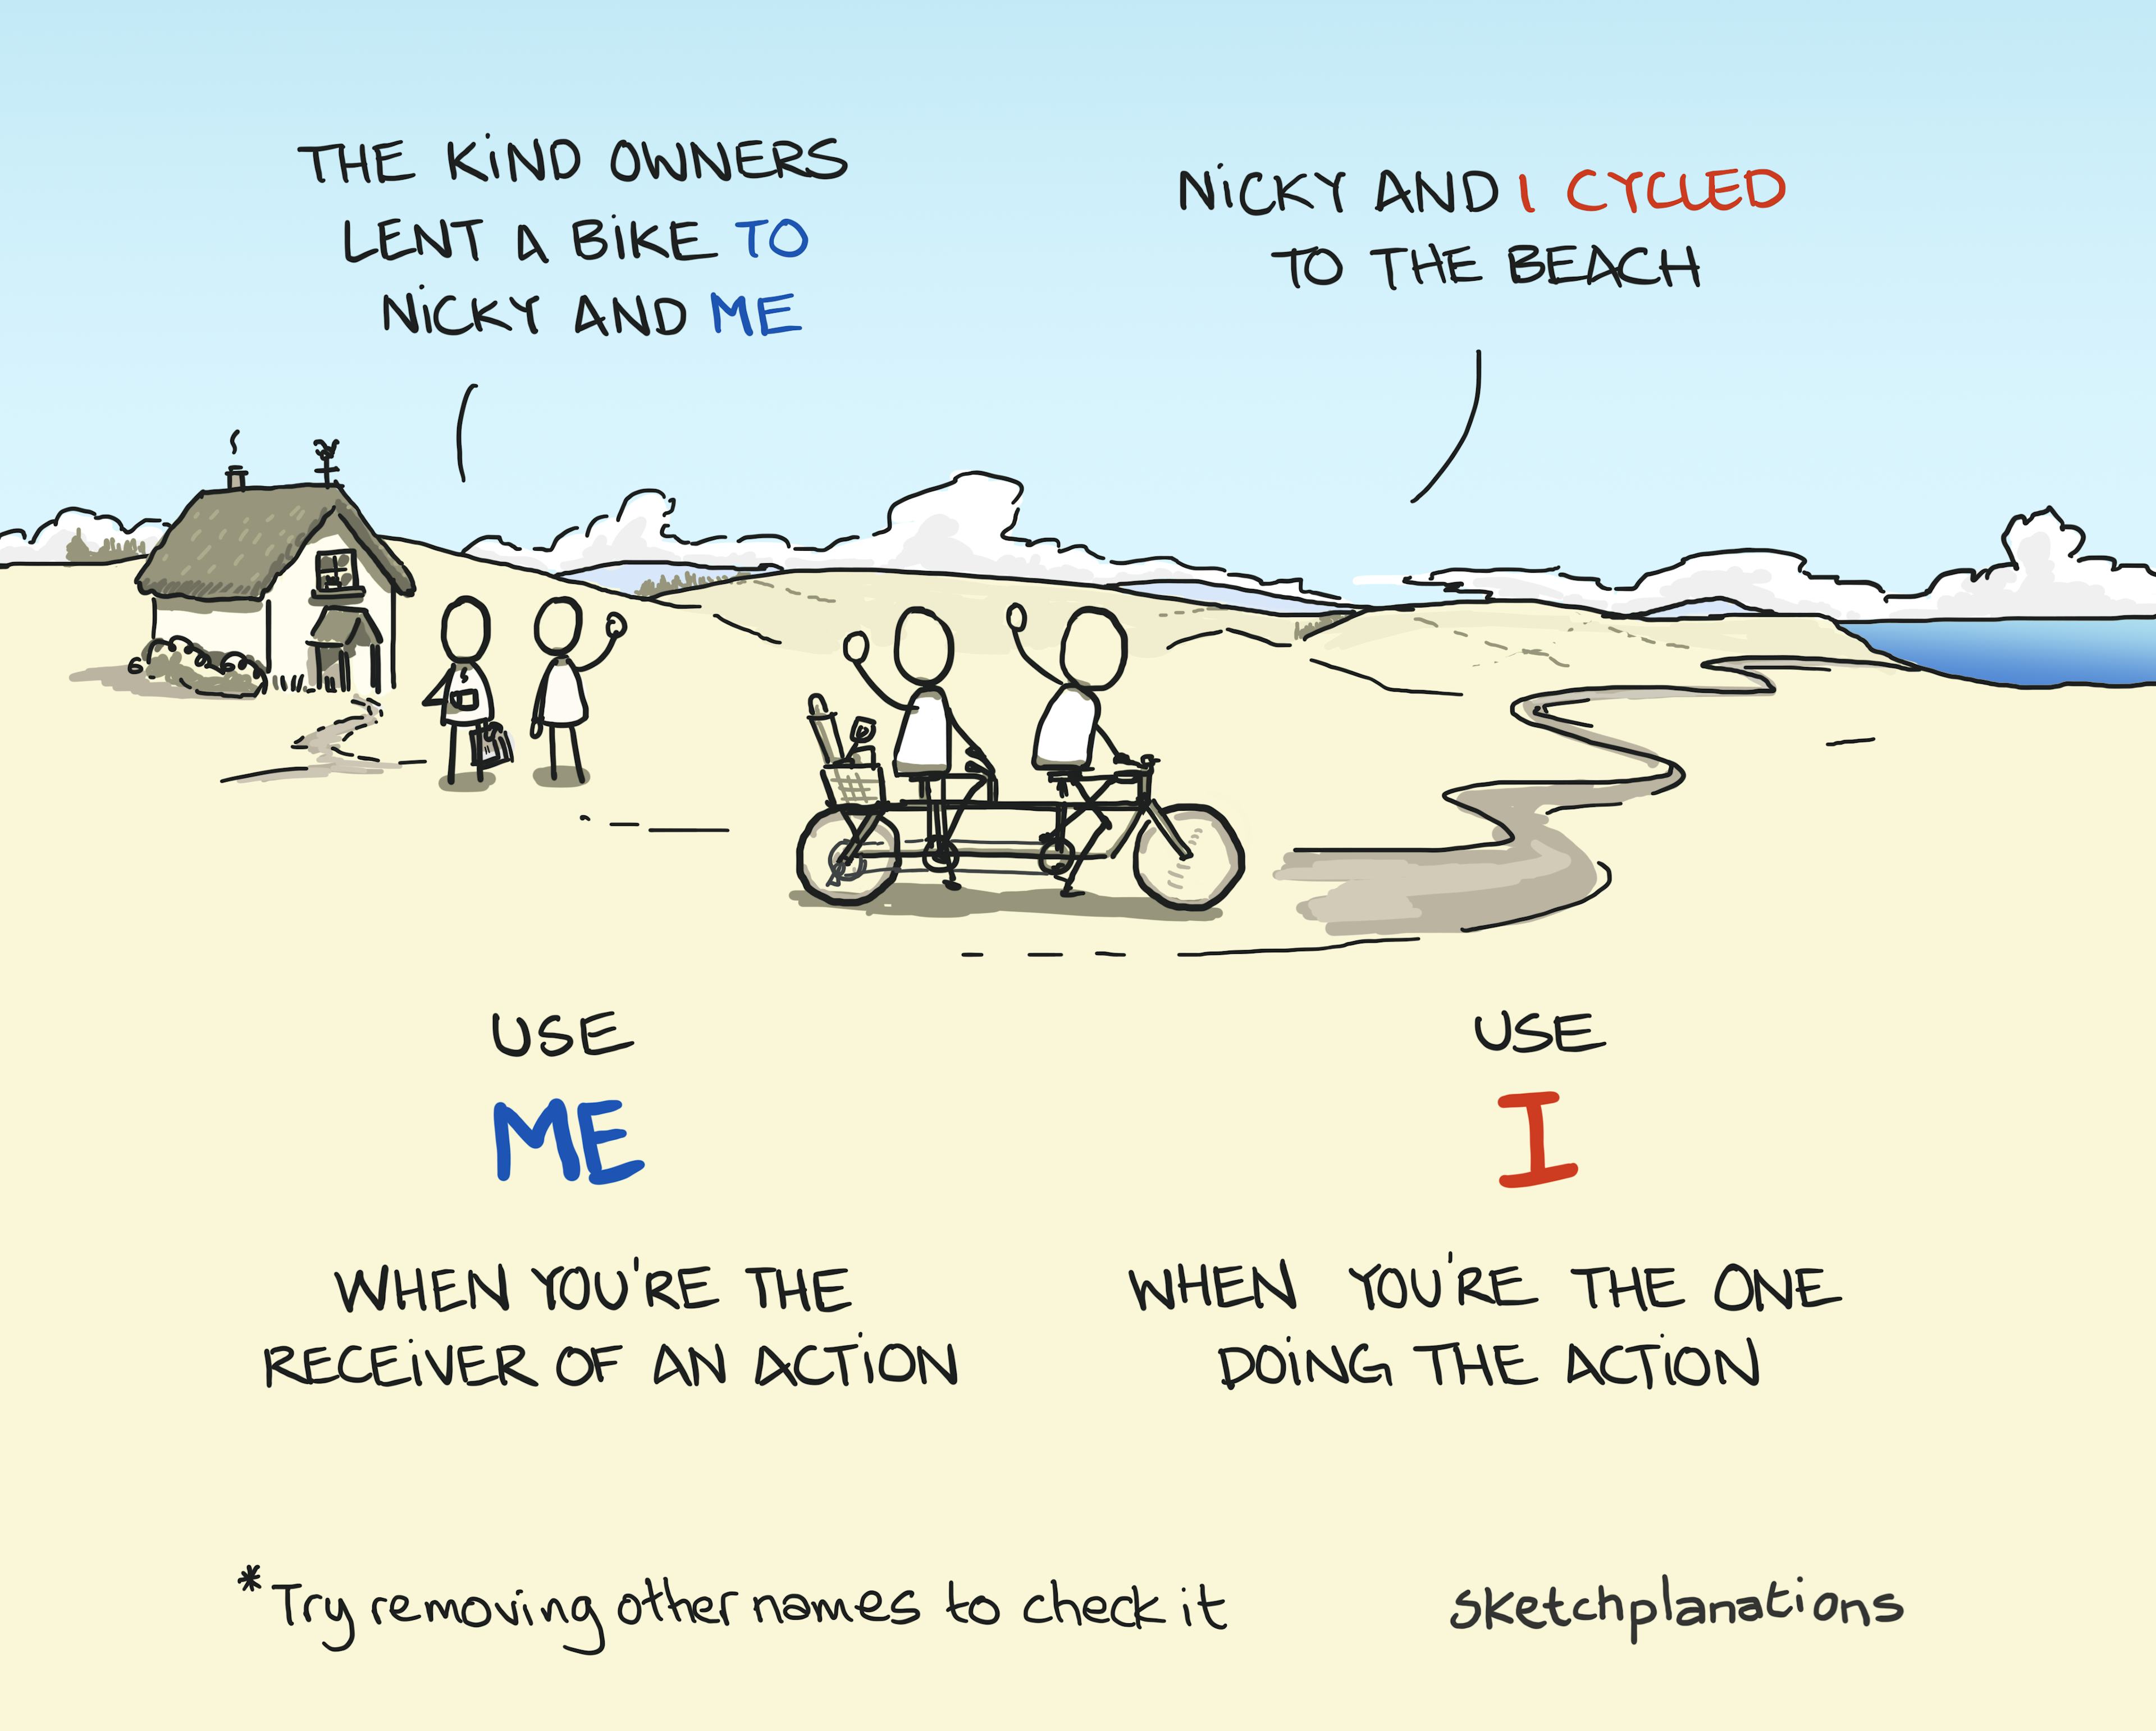 Me or I illustration: explaining when to use me or I through an example with owners of a cottage lending a bike to Nicky and me, and Nicky and I then cycling to a beach down a winding road.